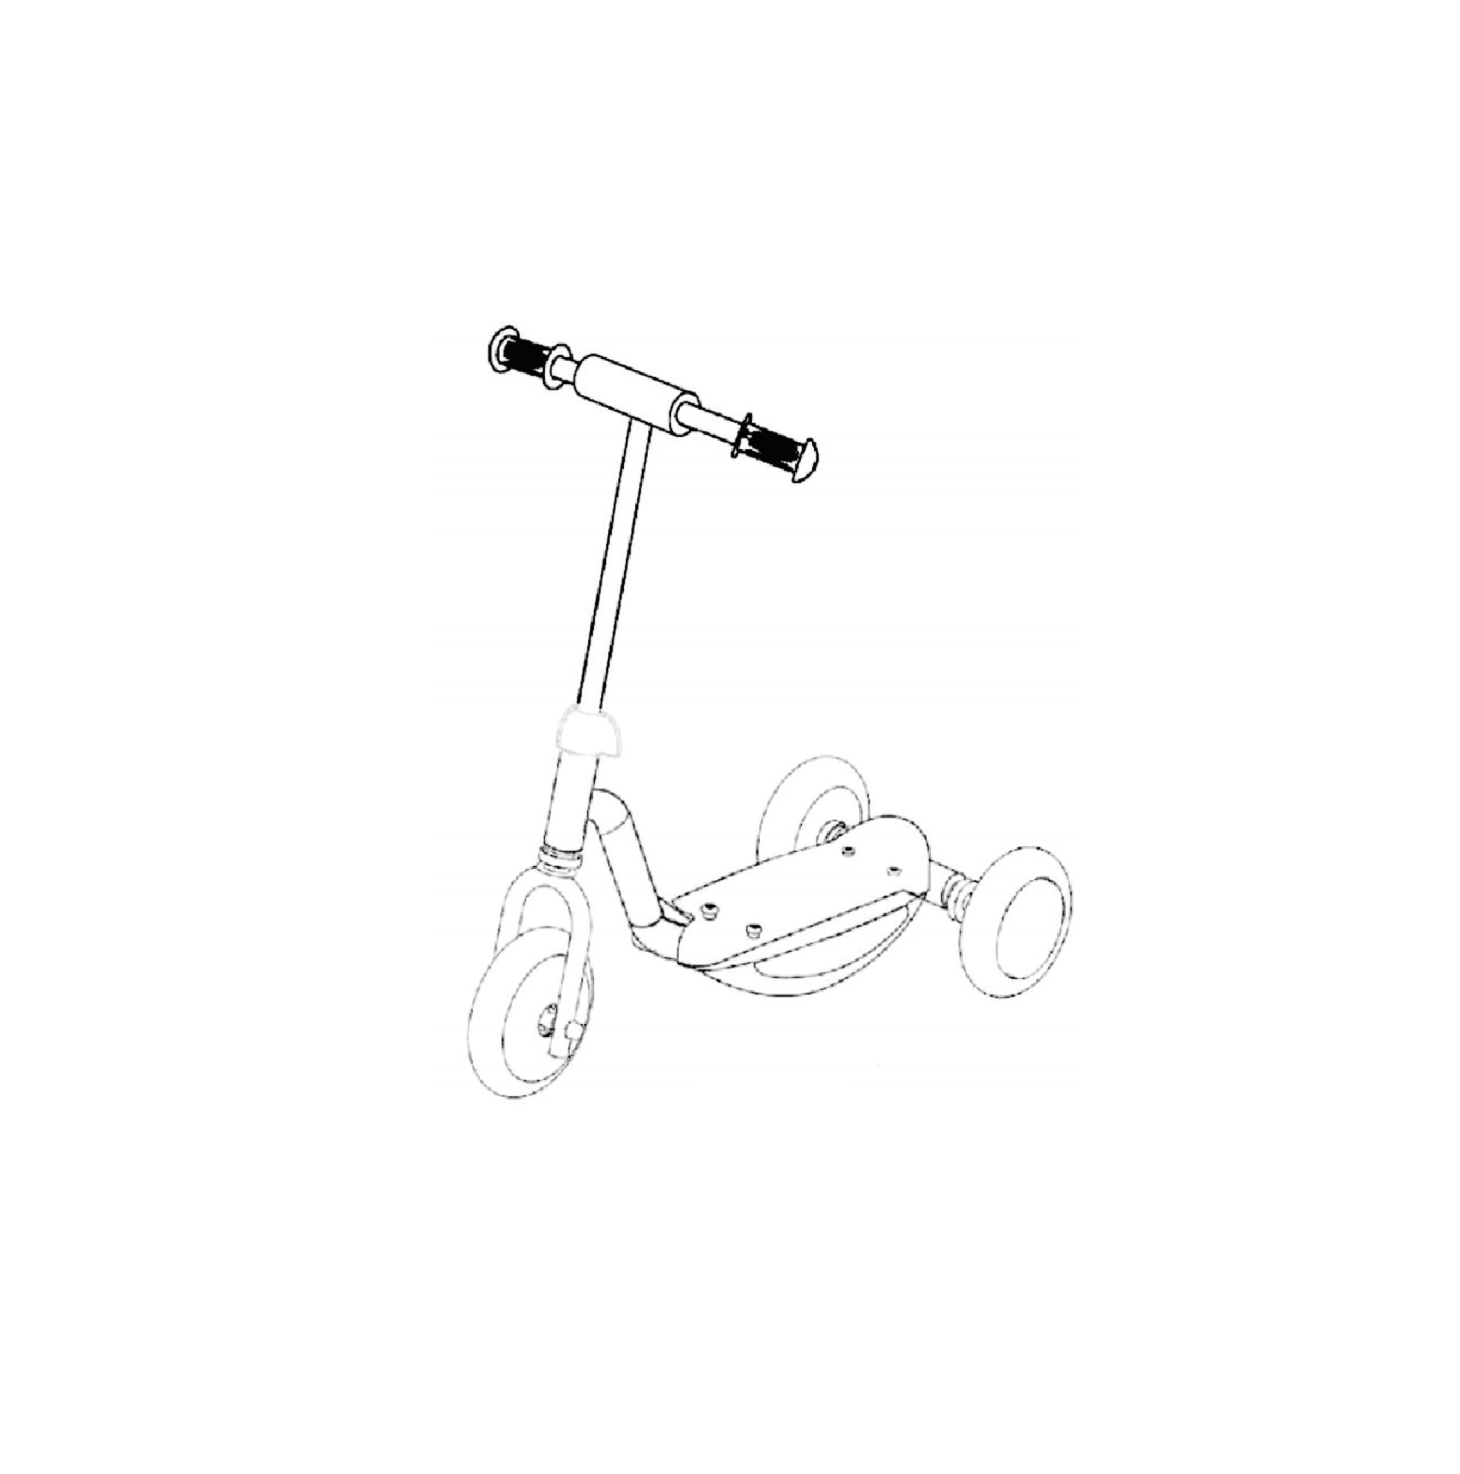 Leisure Mini Tri Scooter Instructions